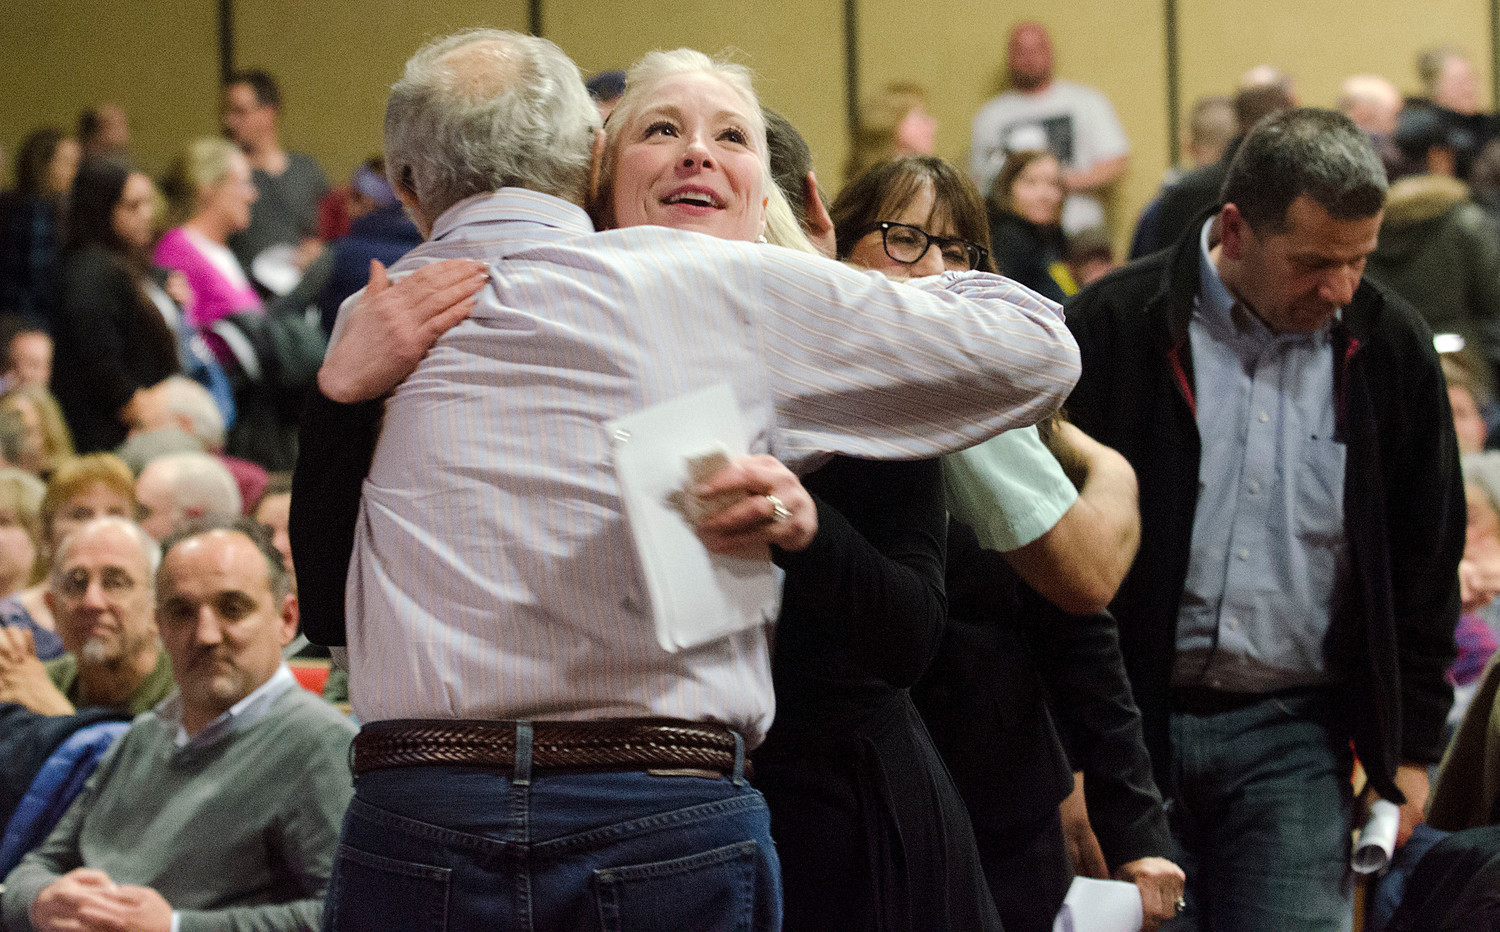 Tracy Priestner a member of the school building committee, receives a congratulatory hug after the vote.